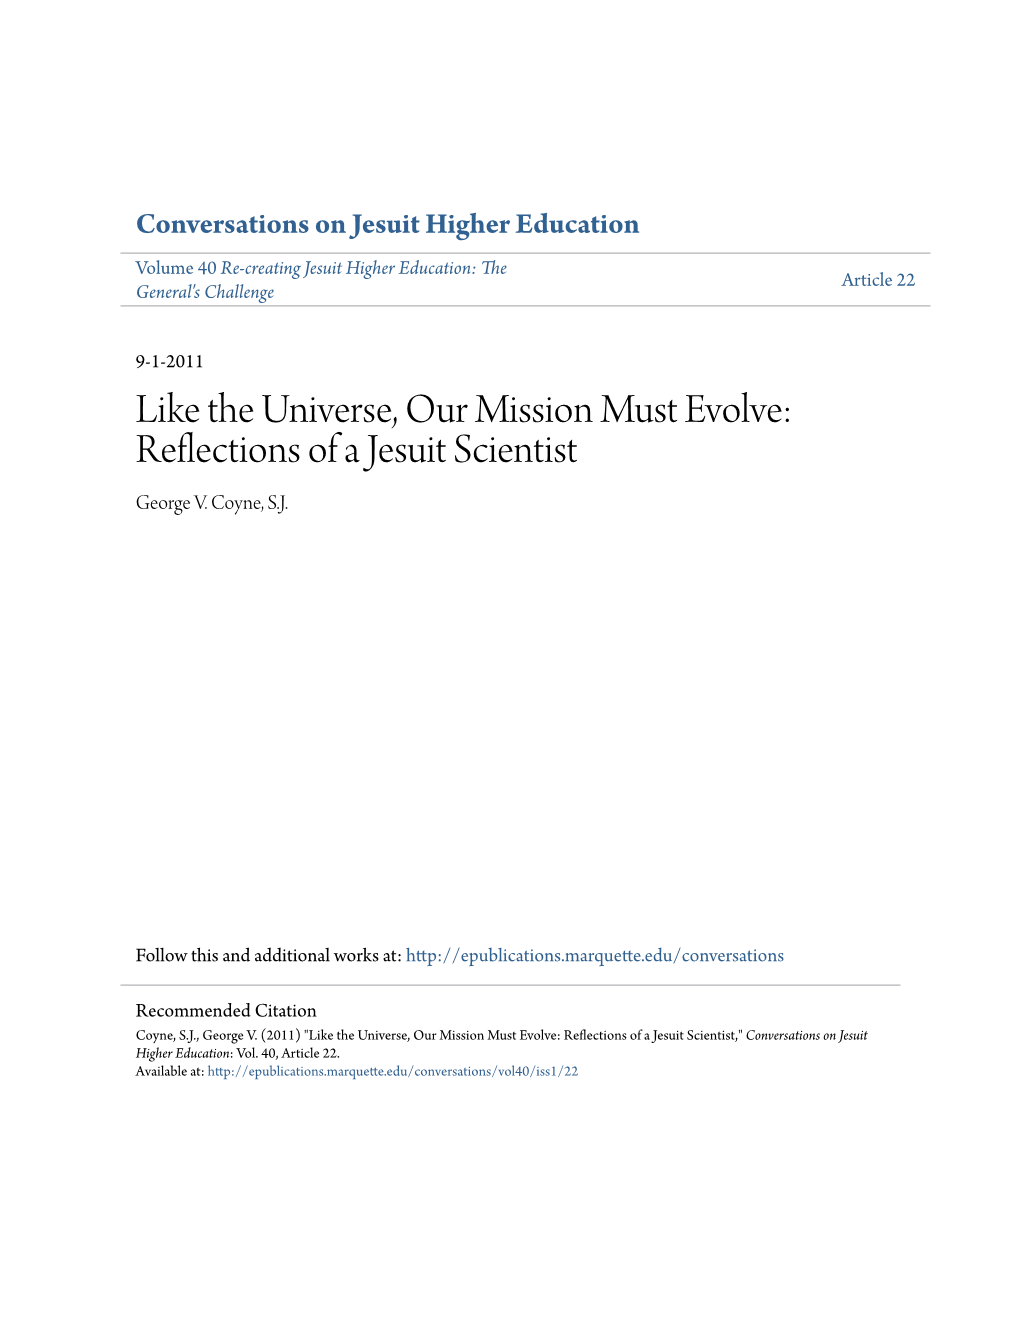 Like the Universe, Our Mission Must Evolve: Reflections of a Jesuit Scientist George V